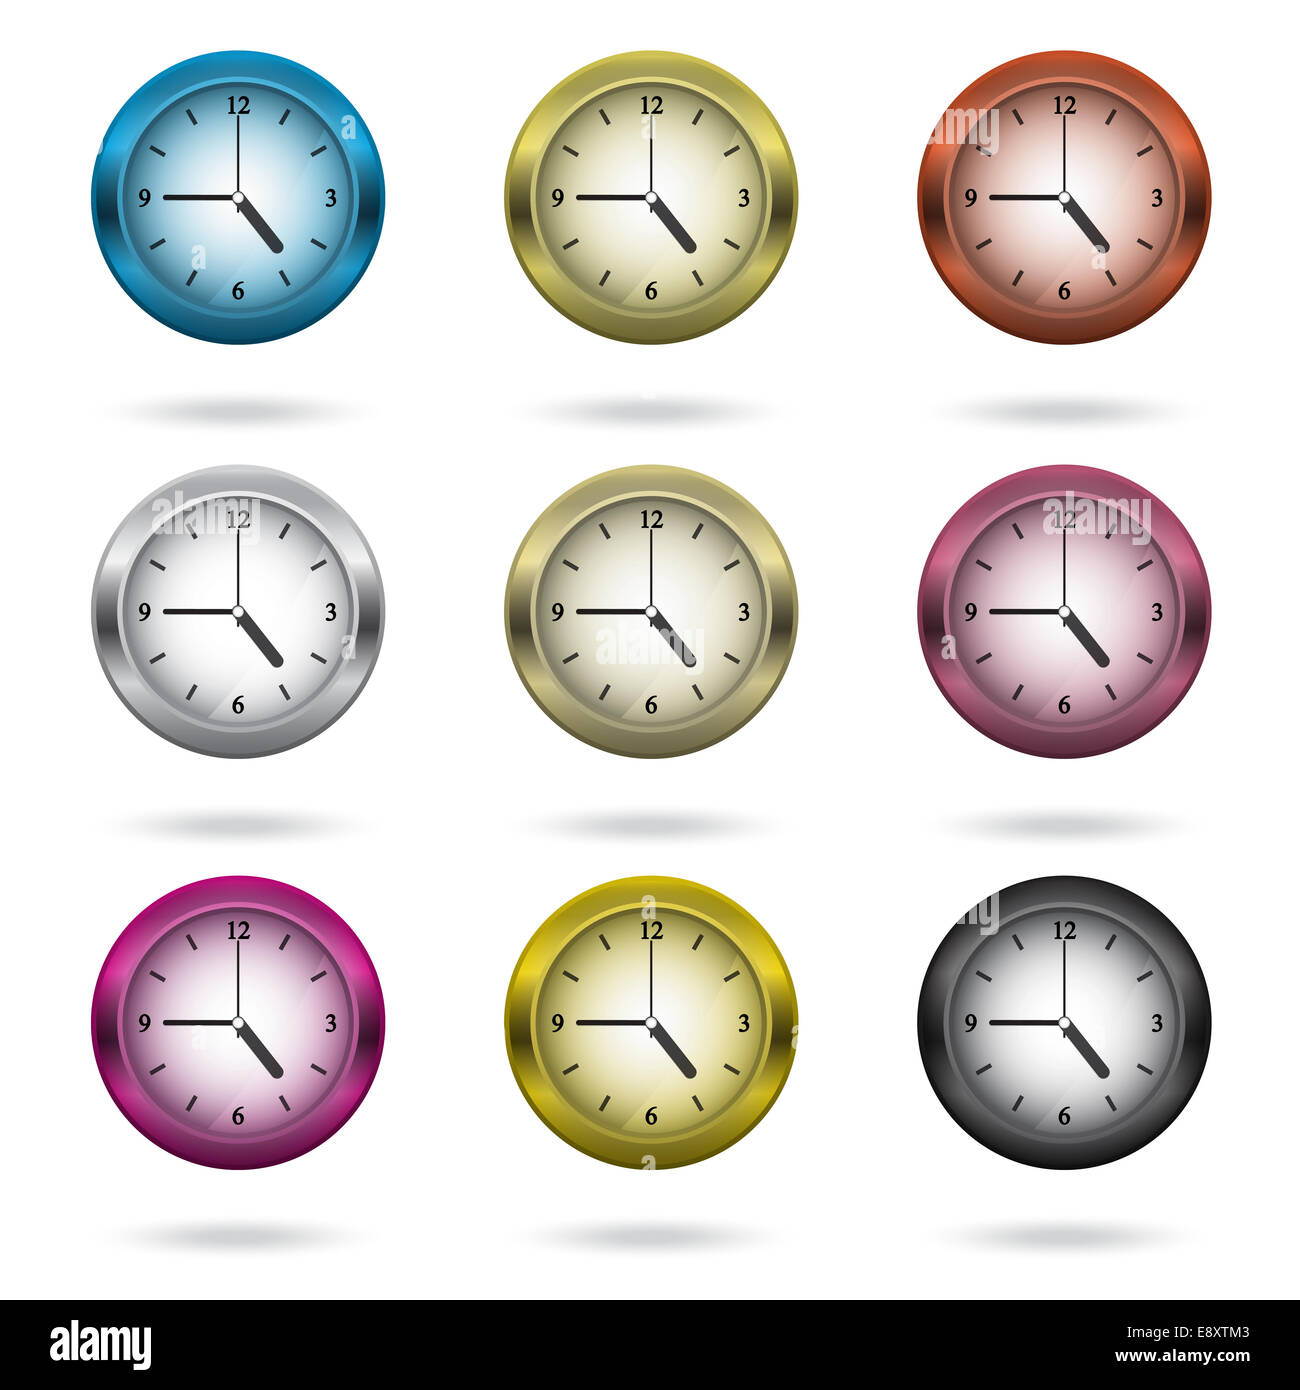 Set of colorful clock icon. Stock Photo